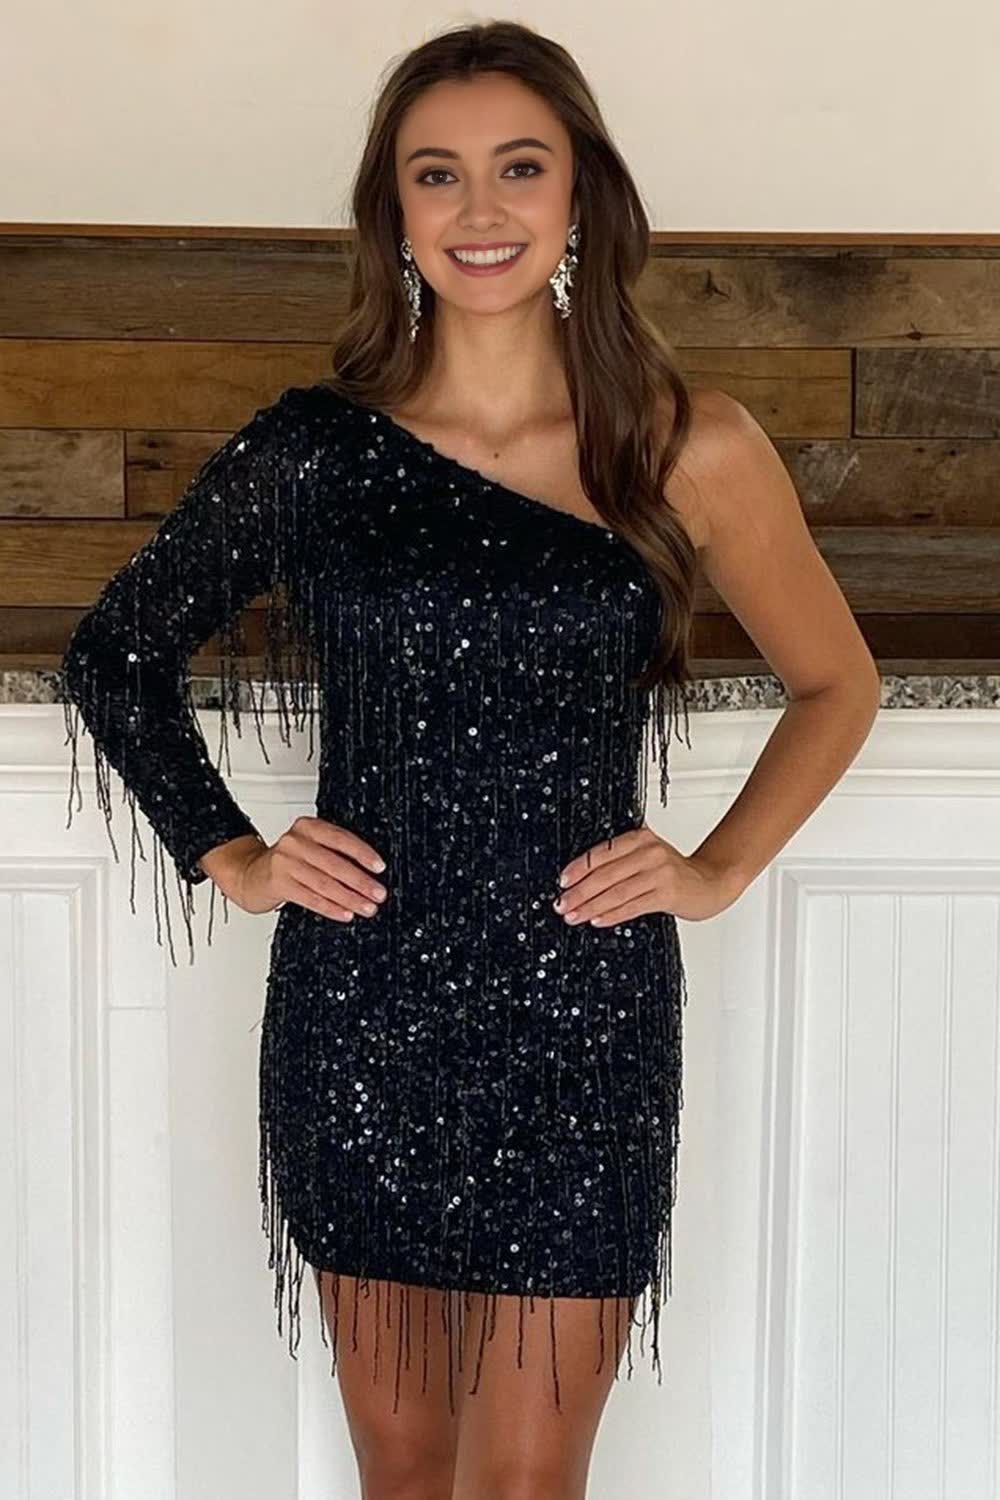 Black One Shoulder Sequins Short Corset Homecoming Dress with Fringes outfit, Black One Shoulder Sequins Short Homecoming Dress with Fringes